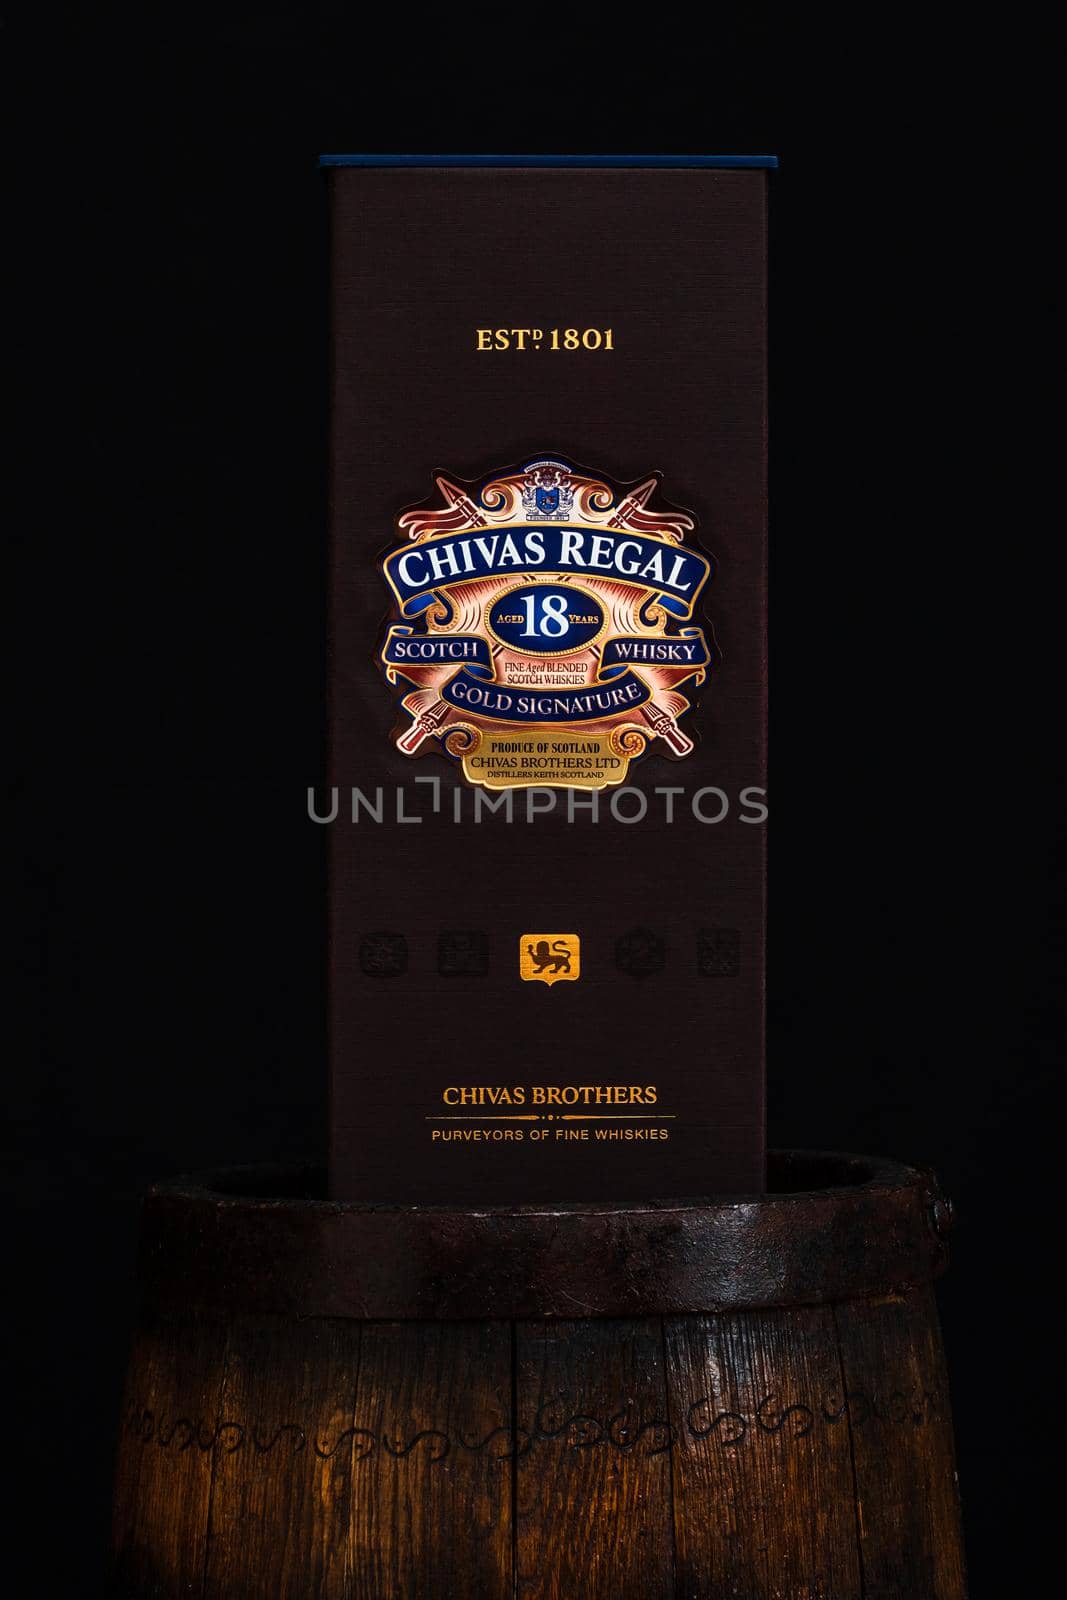 Chivas Regal 18 is blended from whiskies matured for at least 18 years. Whisky bottle on barrel. Illustrative editorial photo Bucharest, Romania, 2021 by vladispas